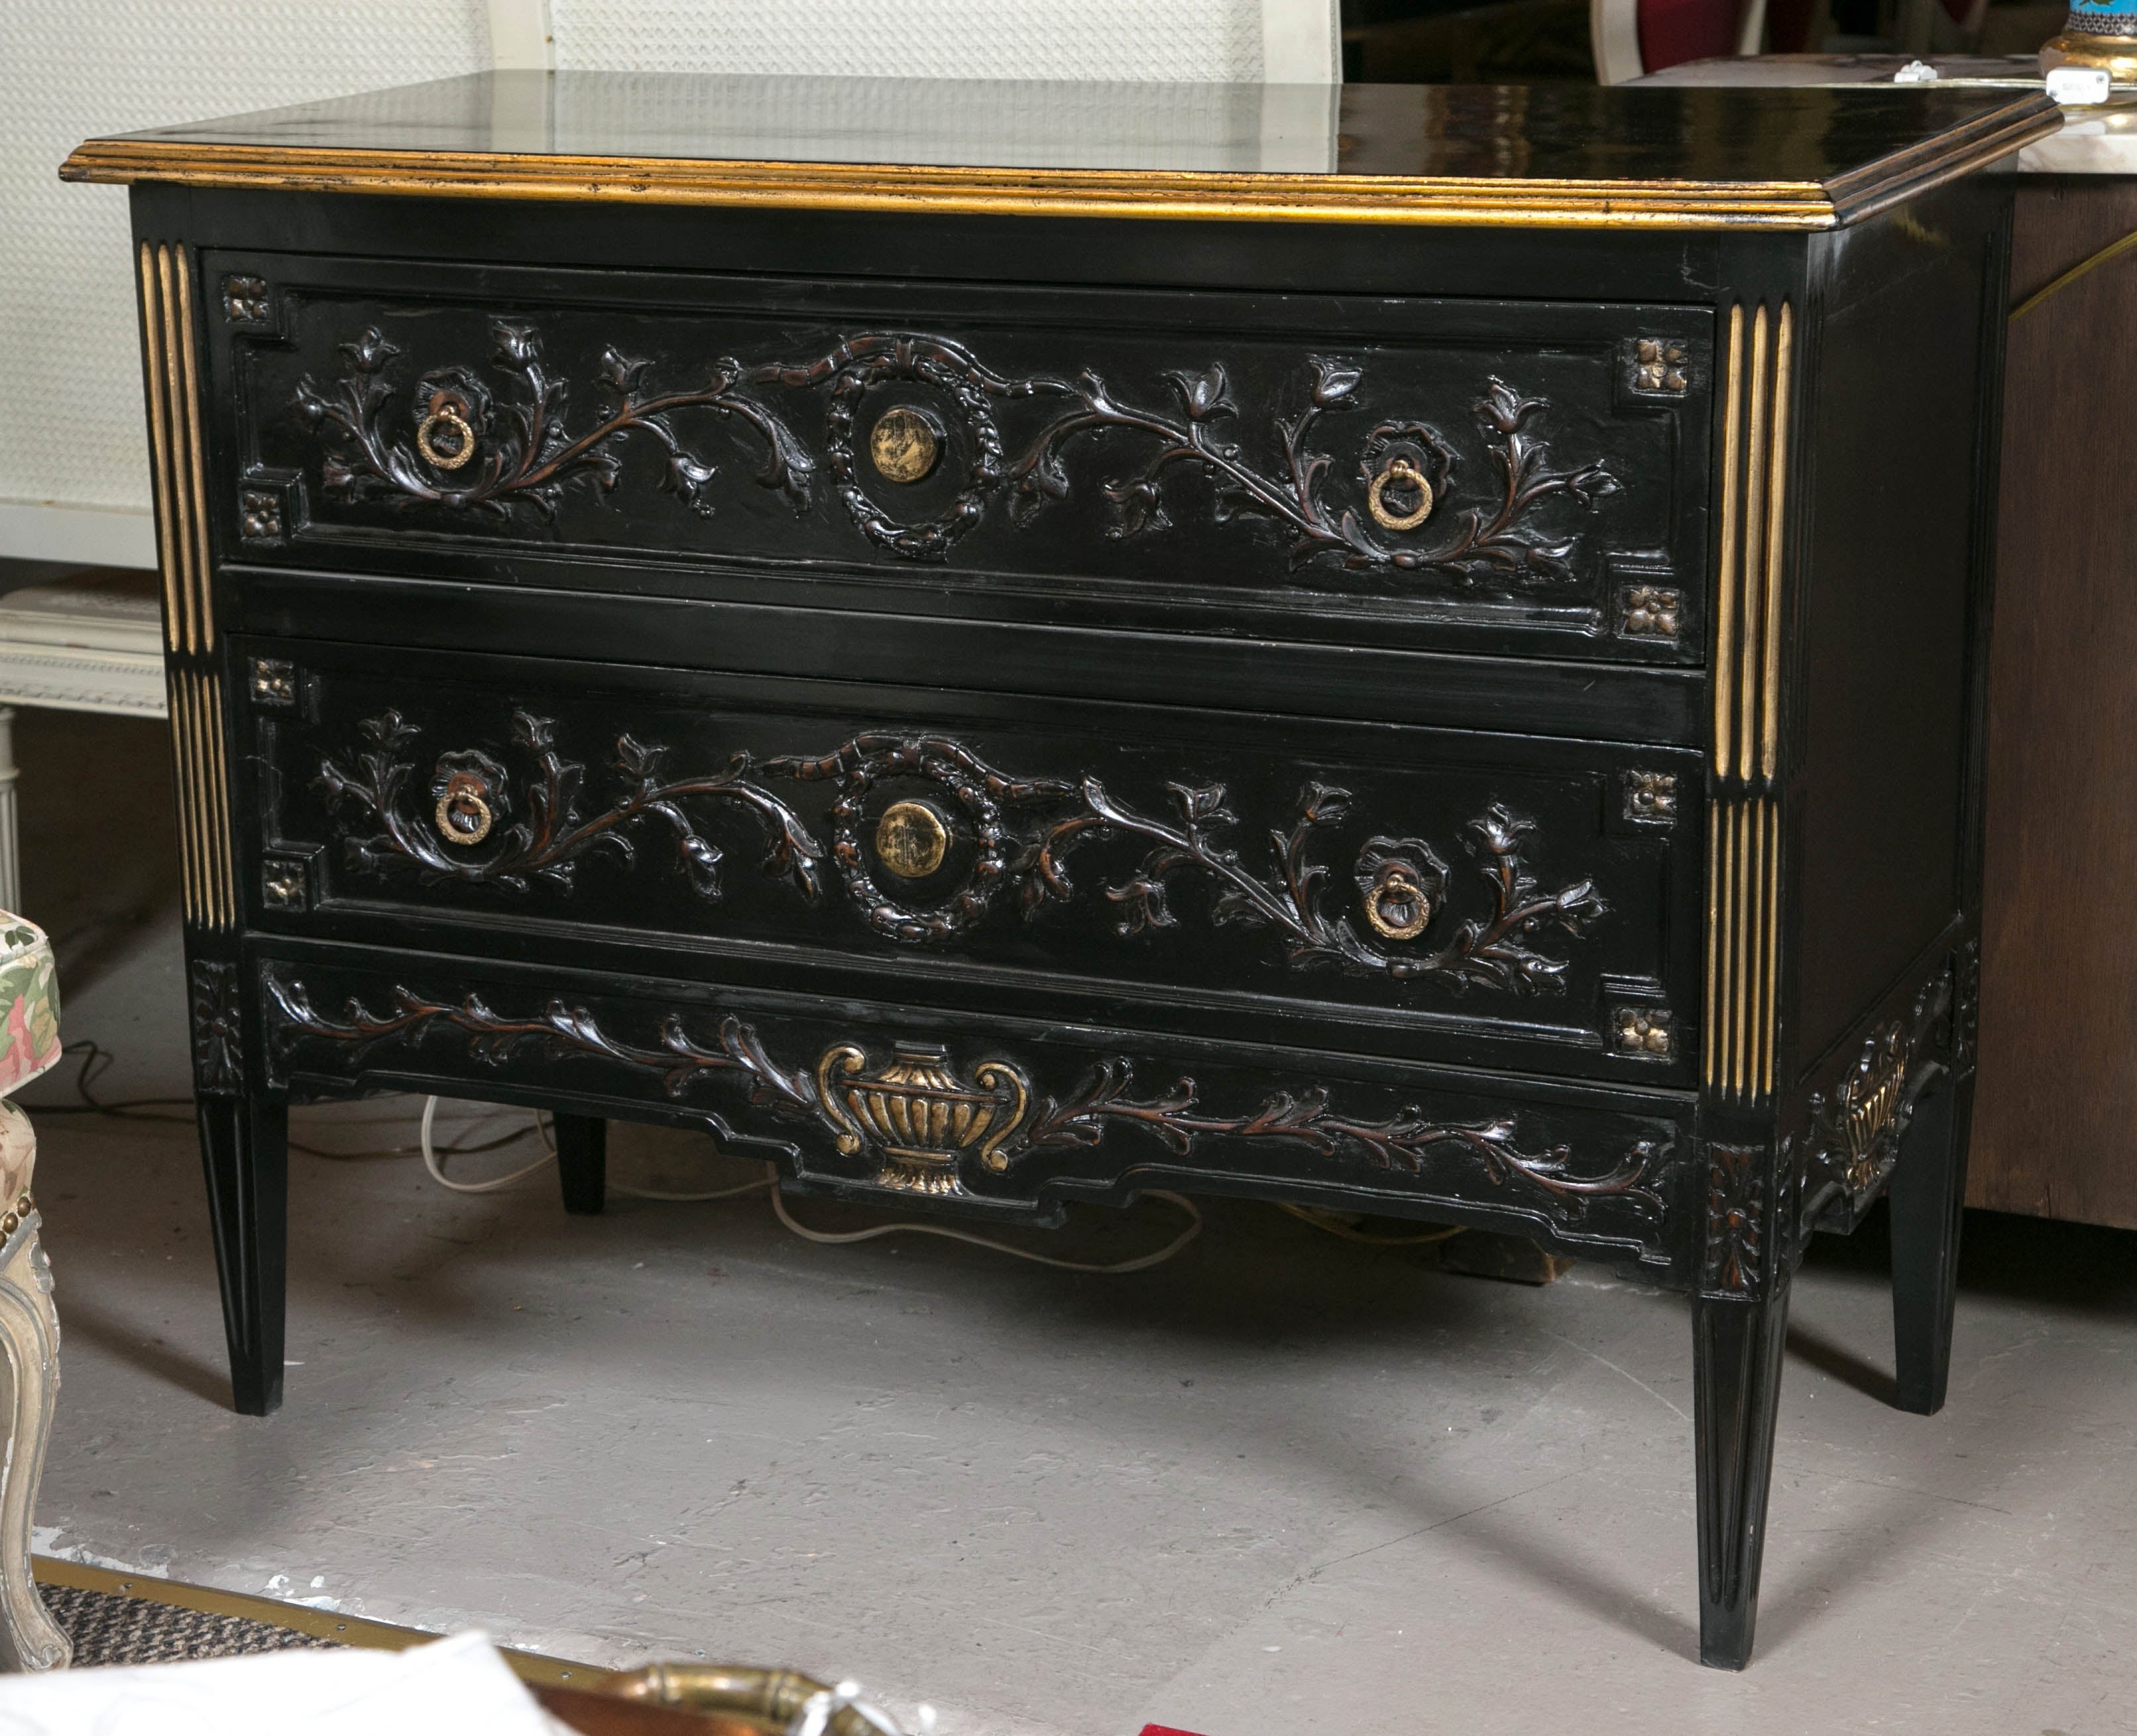 Neoclassical Style Ebonized Highly Carved Commode in the Style of Maison Jansen